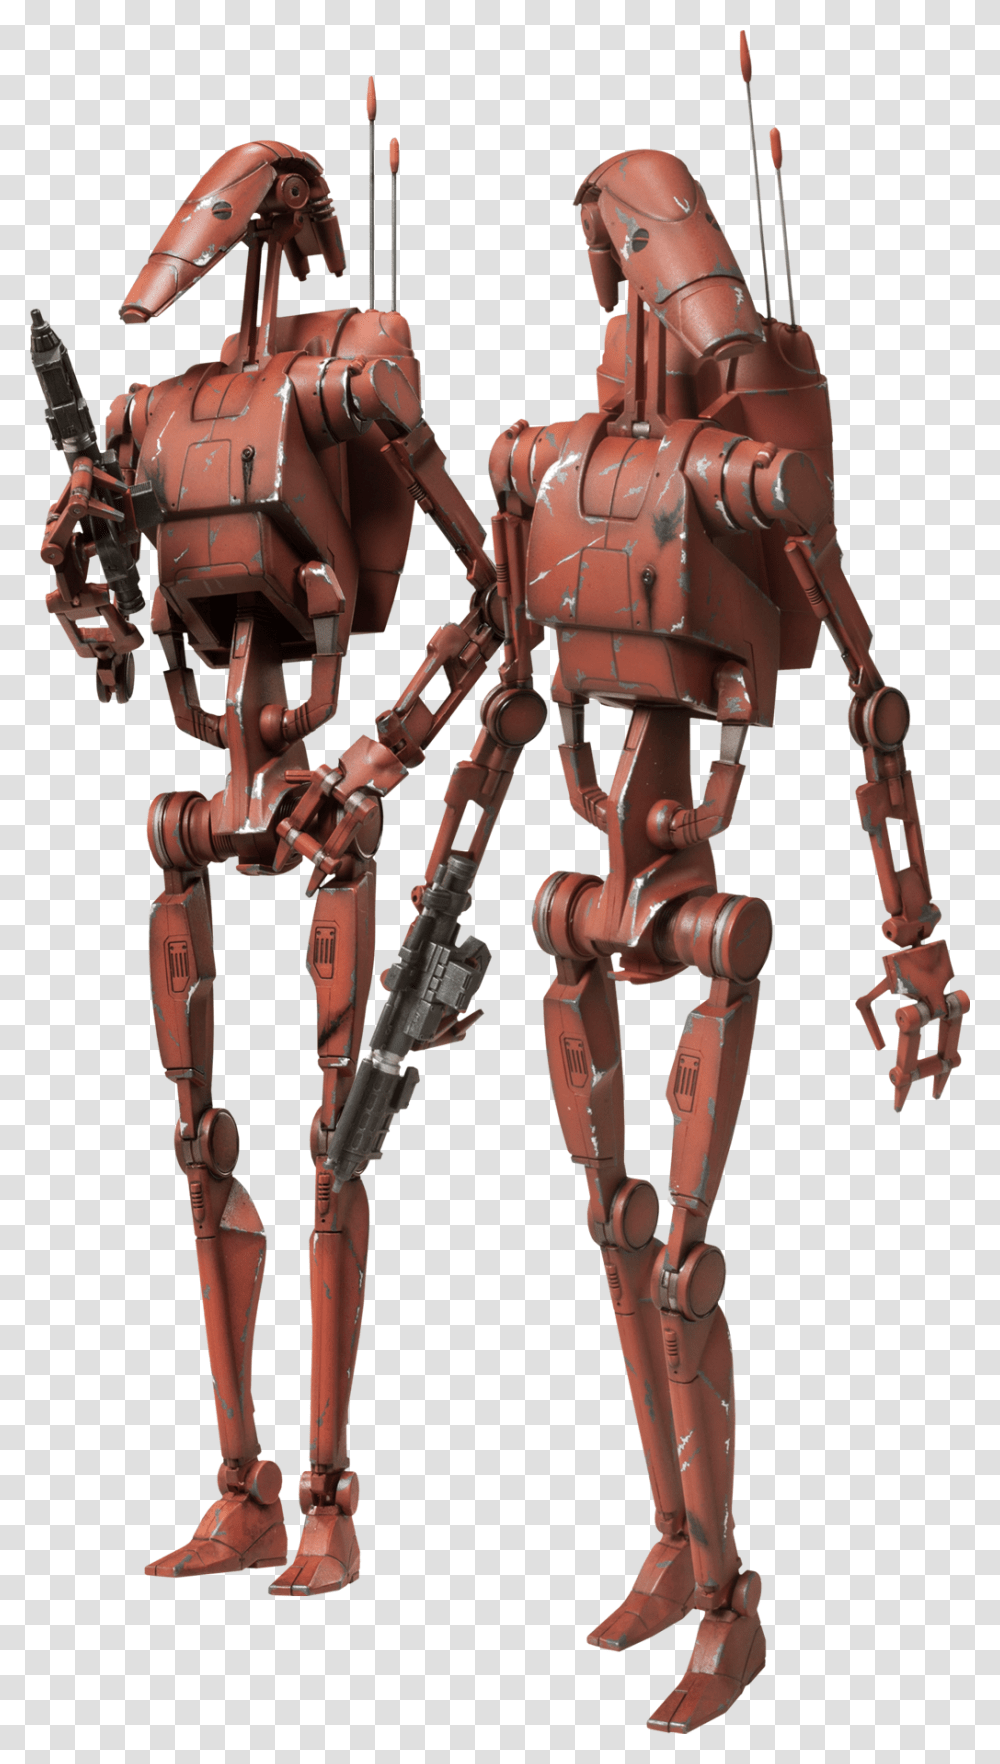 Star Wars Geonosis Droid Geonosis Battle Droid, Toy Transparent Png